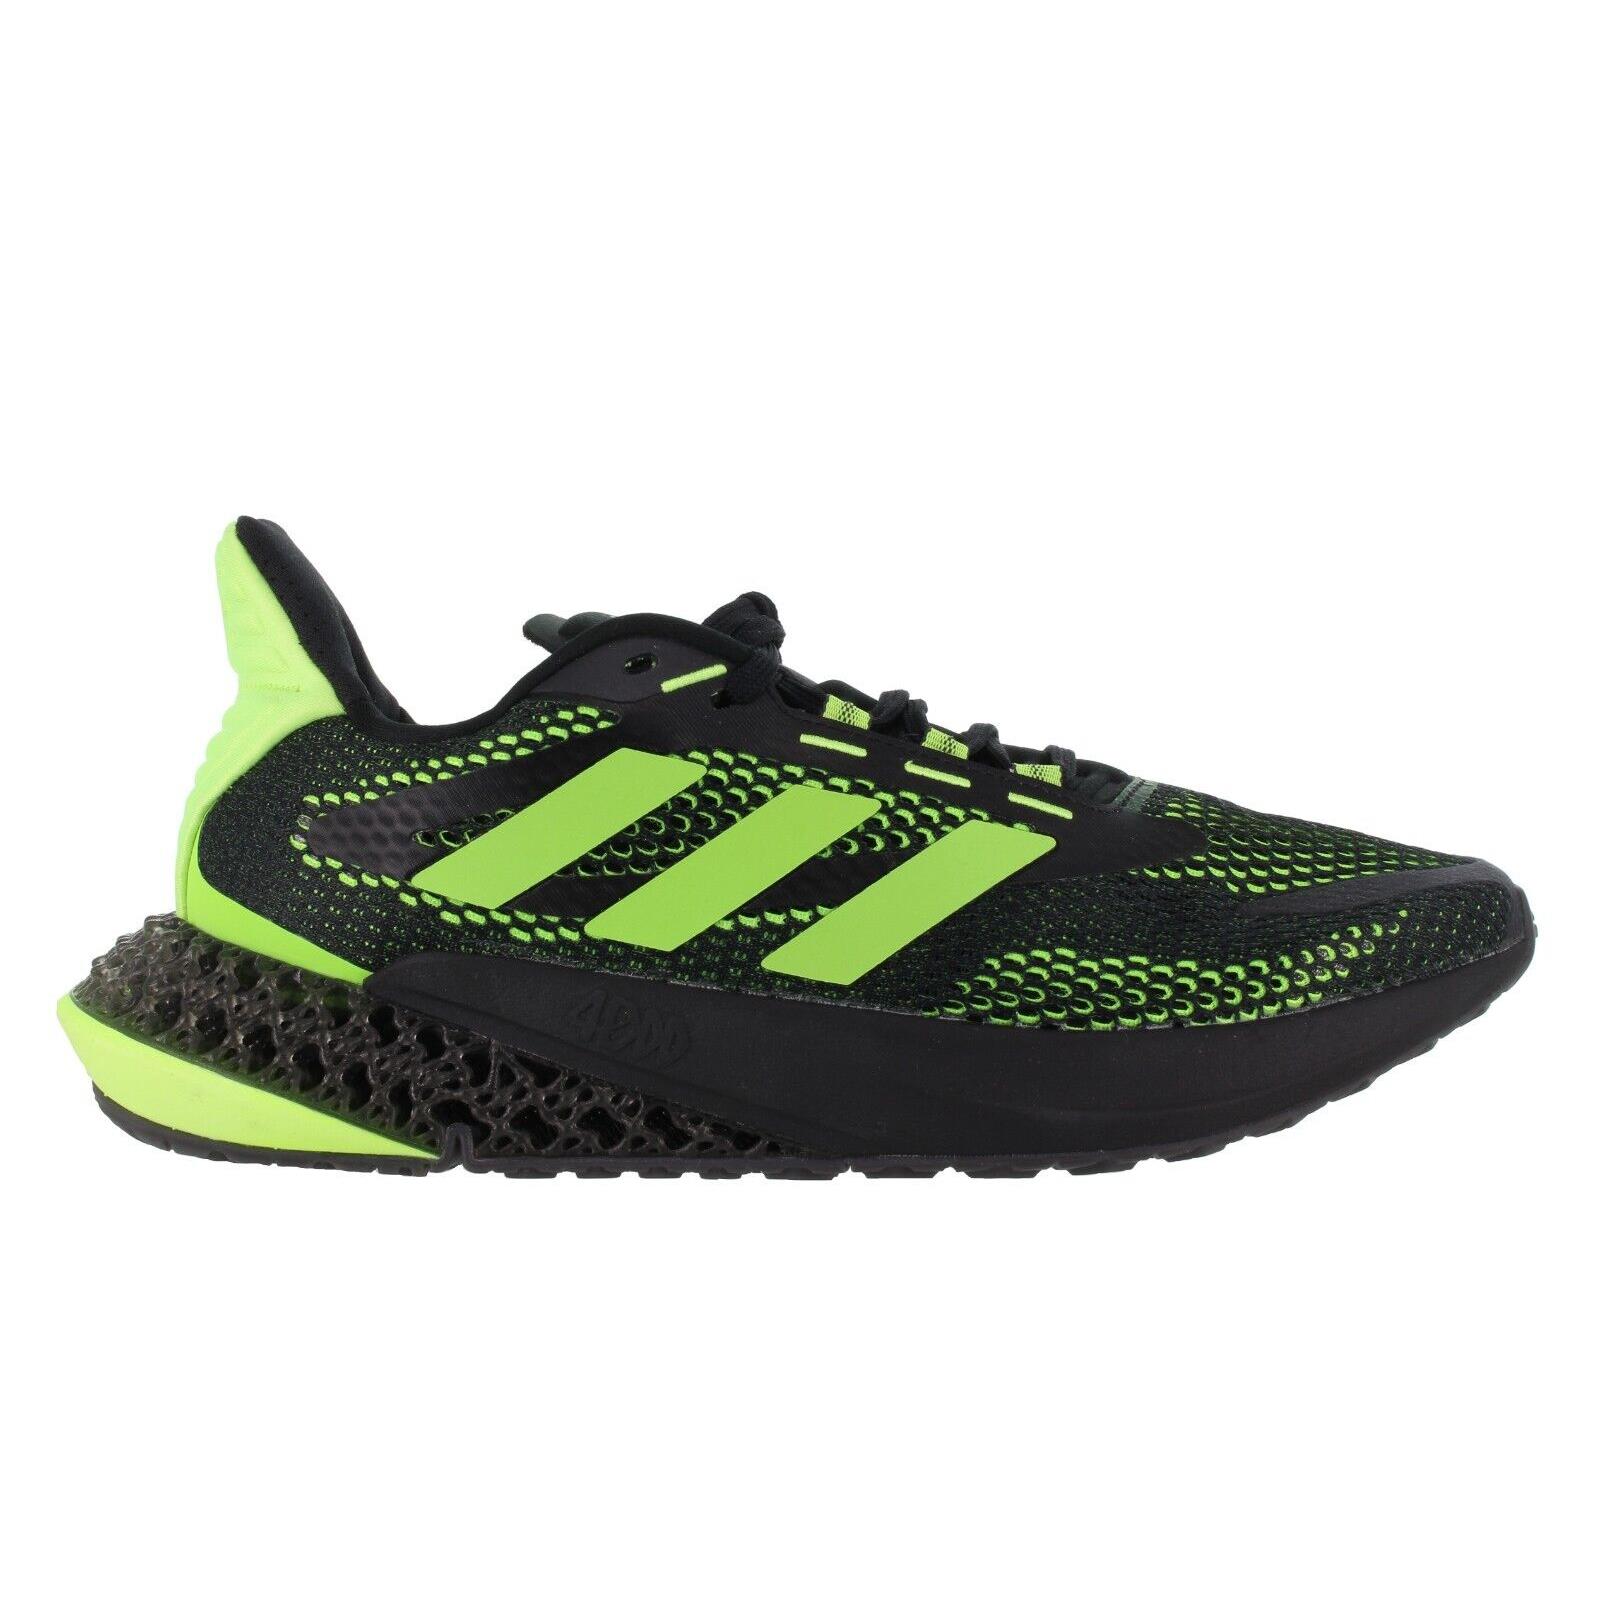 Adidas shoes FWD Pulse - Core Black, Signal Green, Carbon 0